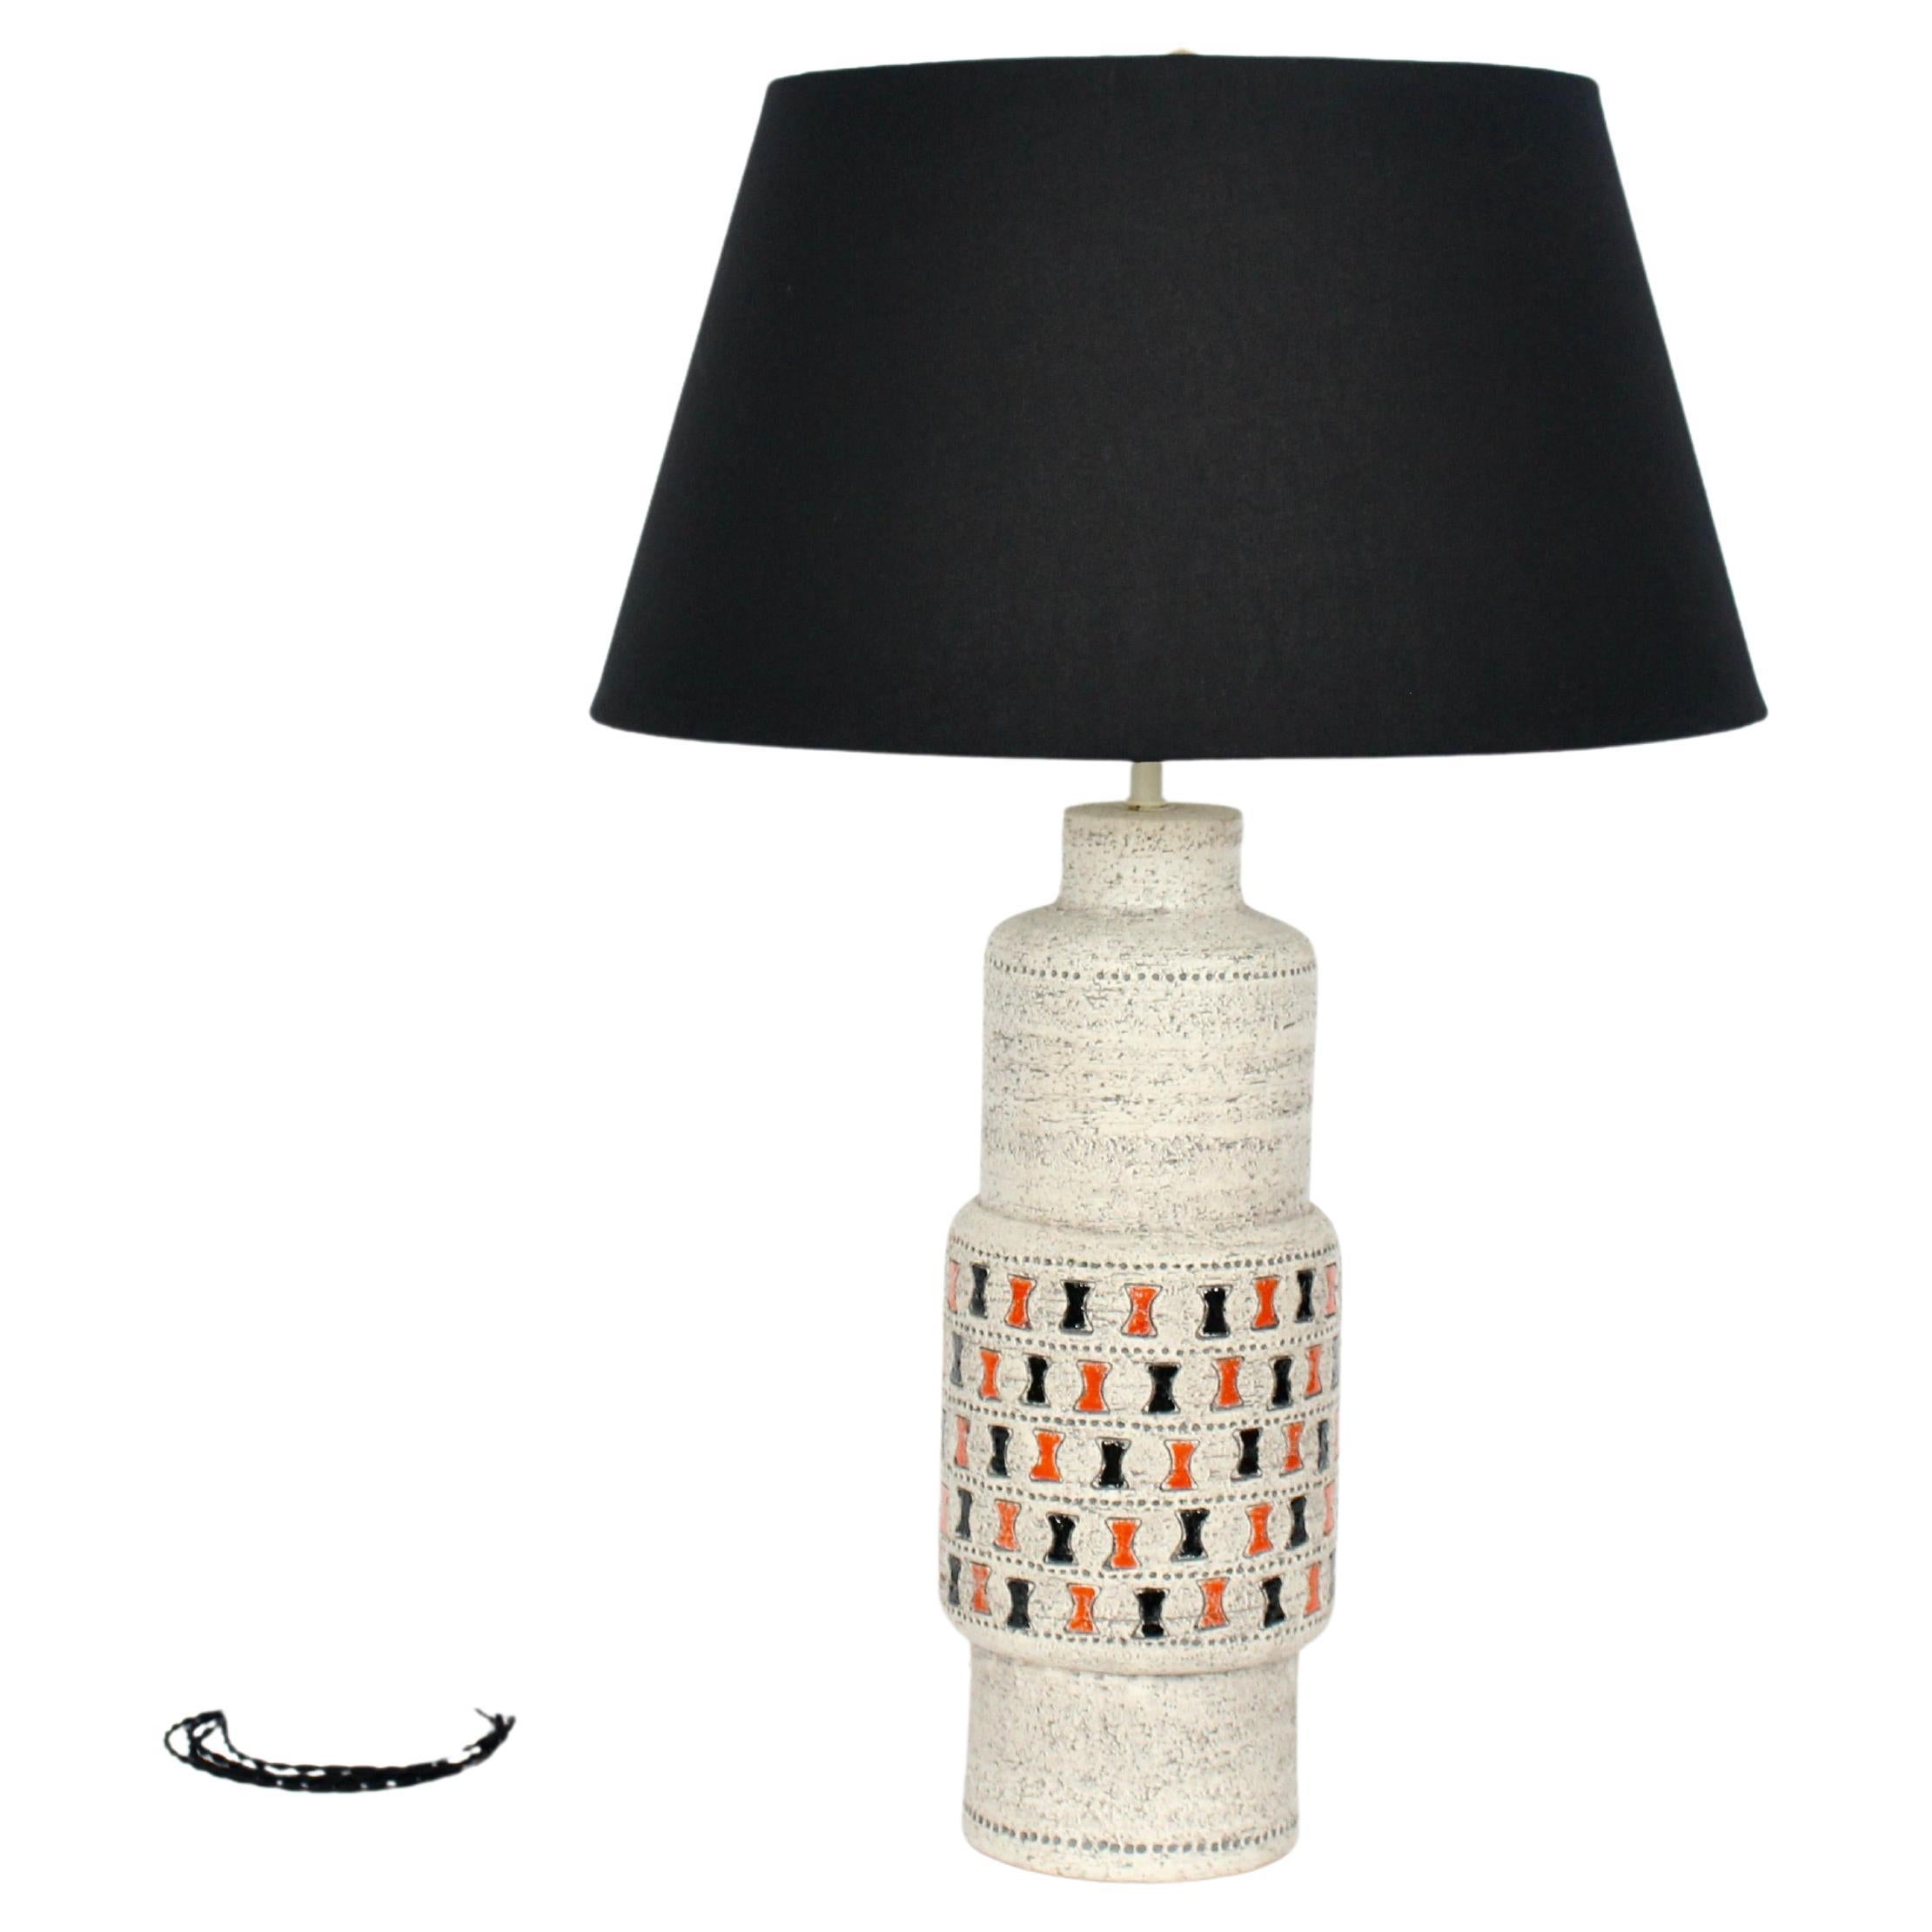 Aldo Londi for Bitossi handcrafted off white art pottery table lamp, 1960's. Featuring a textured organic earthen form in Off White, Gray enhanced stipple, finished with hand painted Orange and Black abstract hourglass accents. Black shade shown for